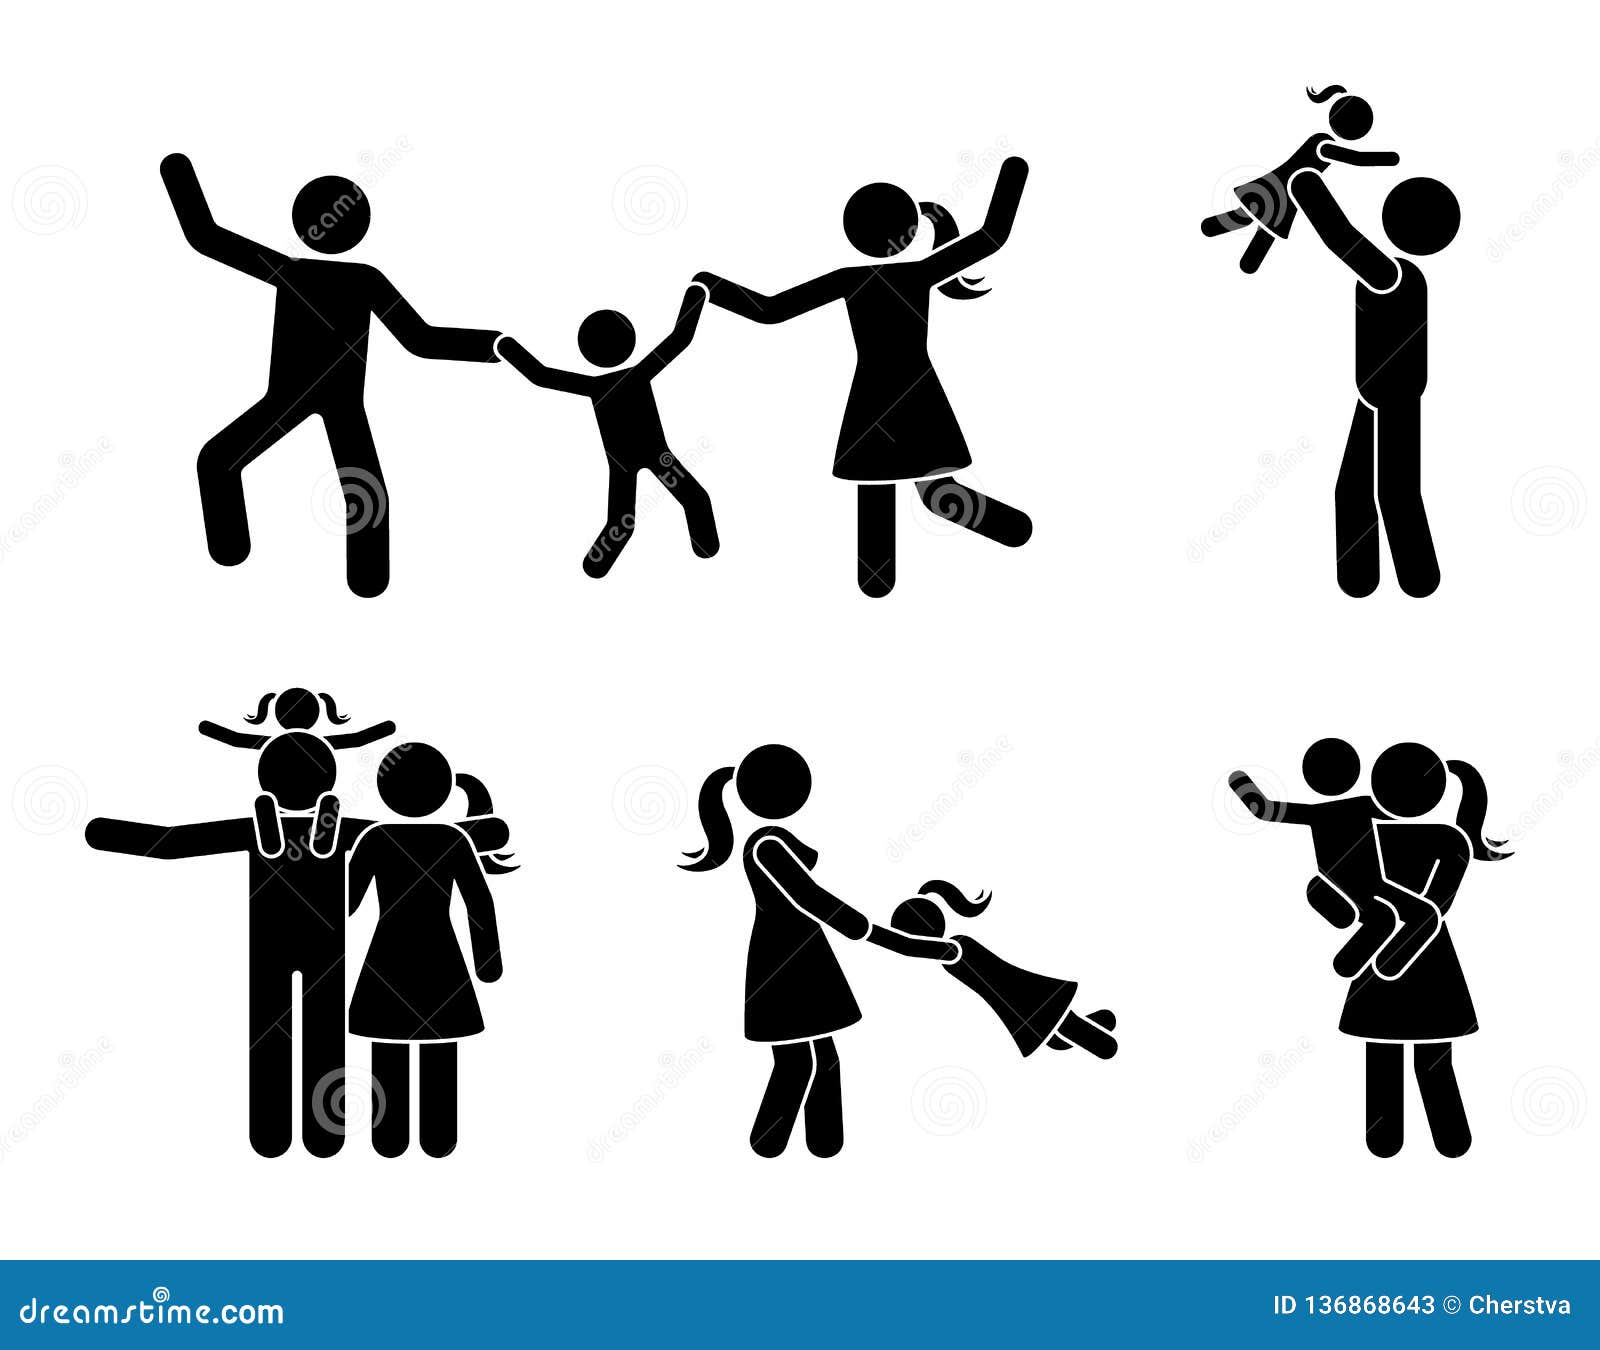 stick figure happy family having fun icon set. parents and children playing together pictogram.